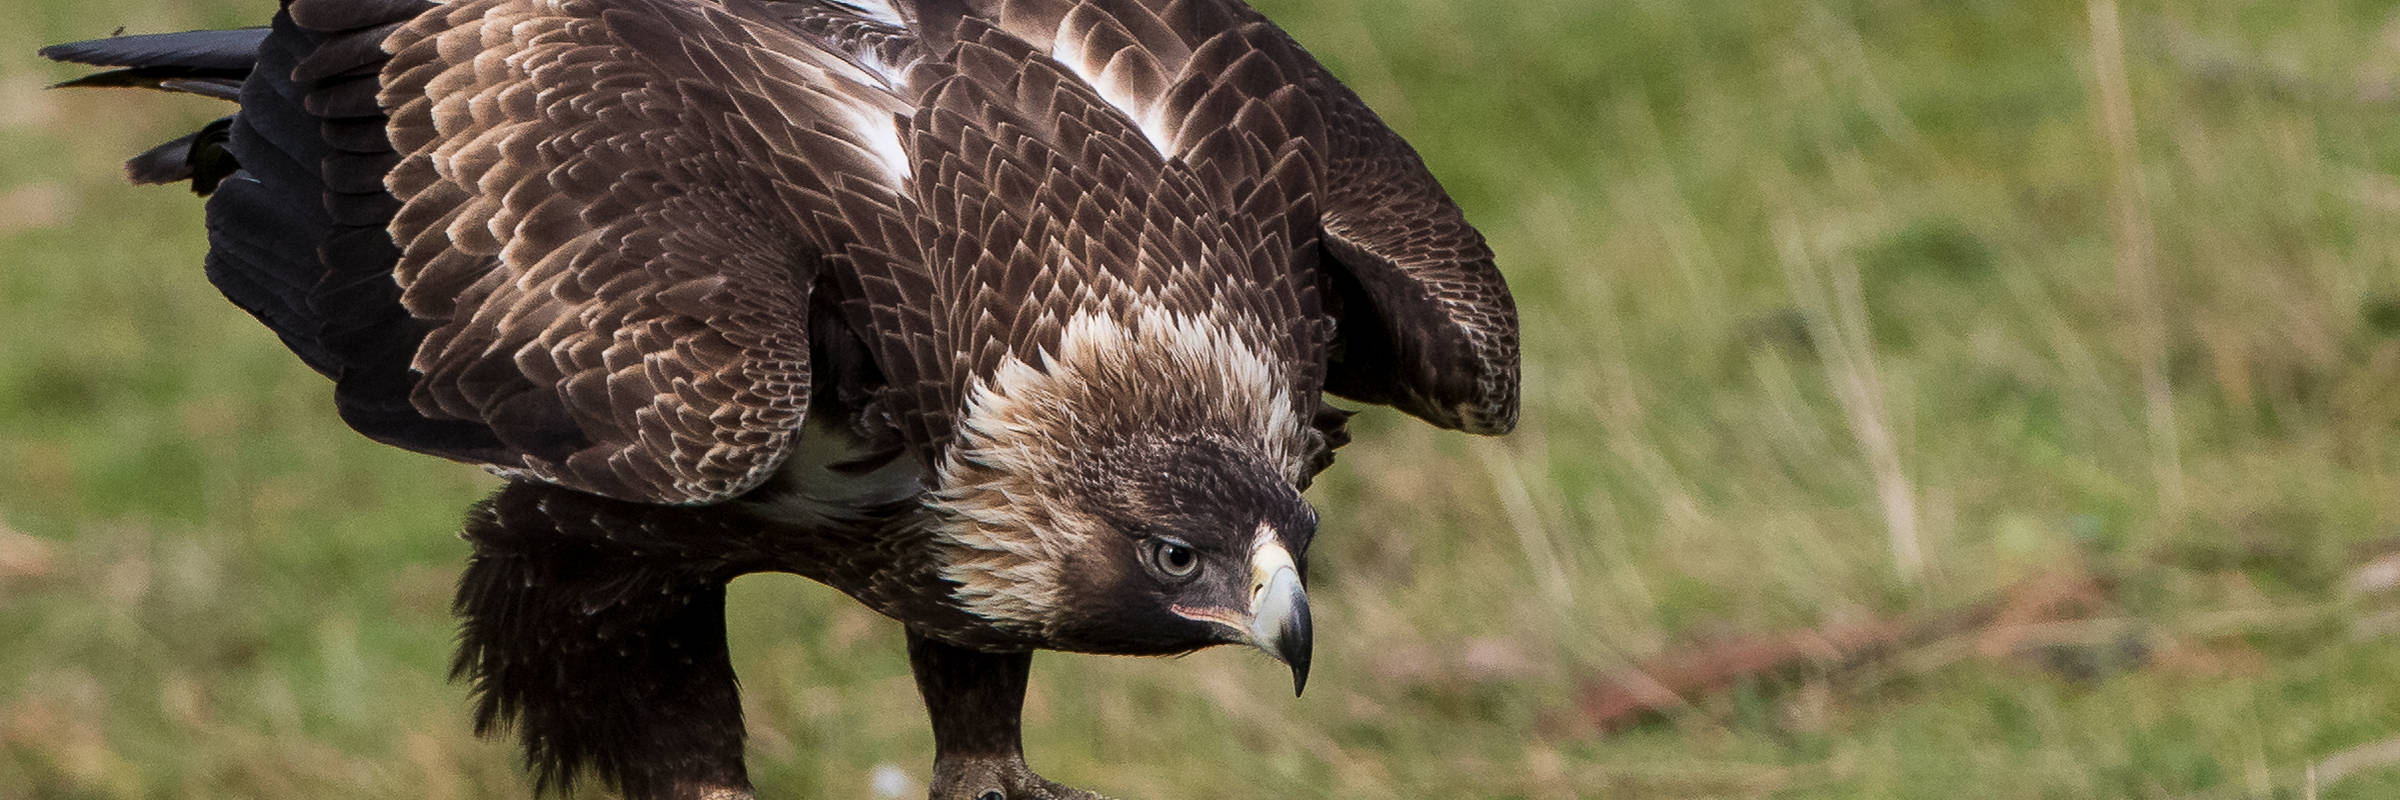 Close-up of a wedge-tailed eagle standing on a dead branch, leaning forward. In the background is a grassy area. The pale feathers on the nape of its neck indicate that it is a young bird. Photo: Alfred Schulte, taken at Inala on Bruny Island.